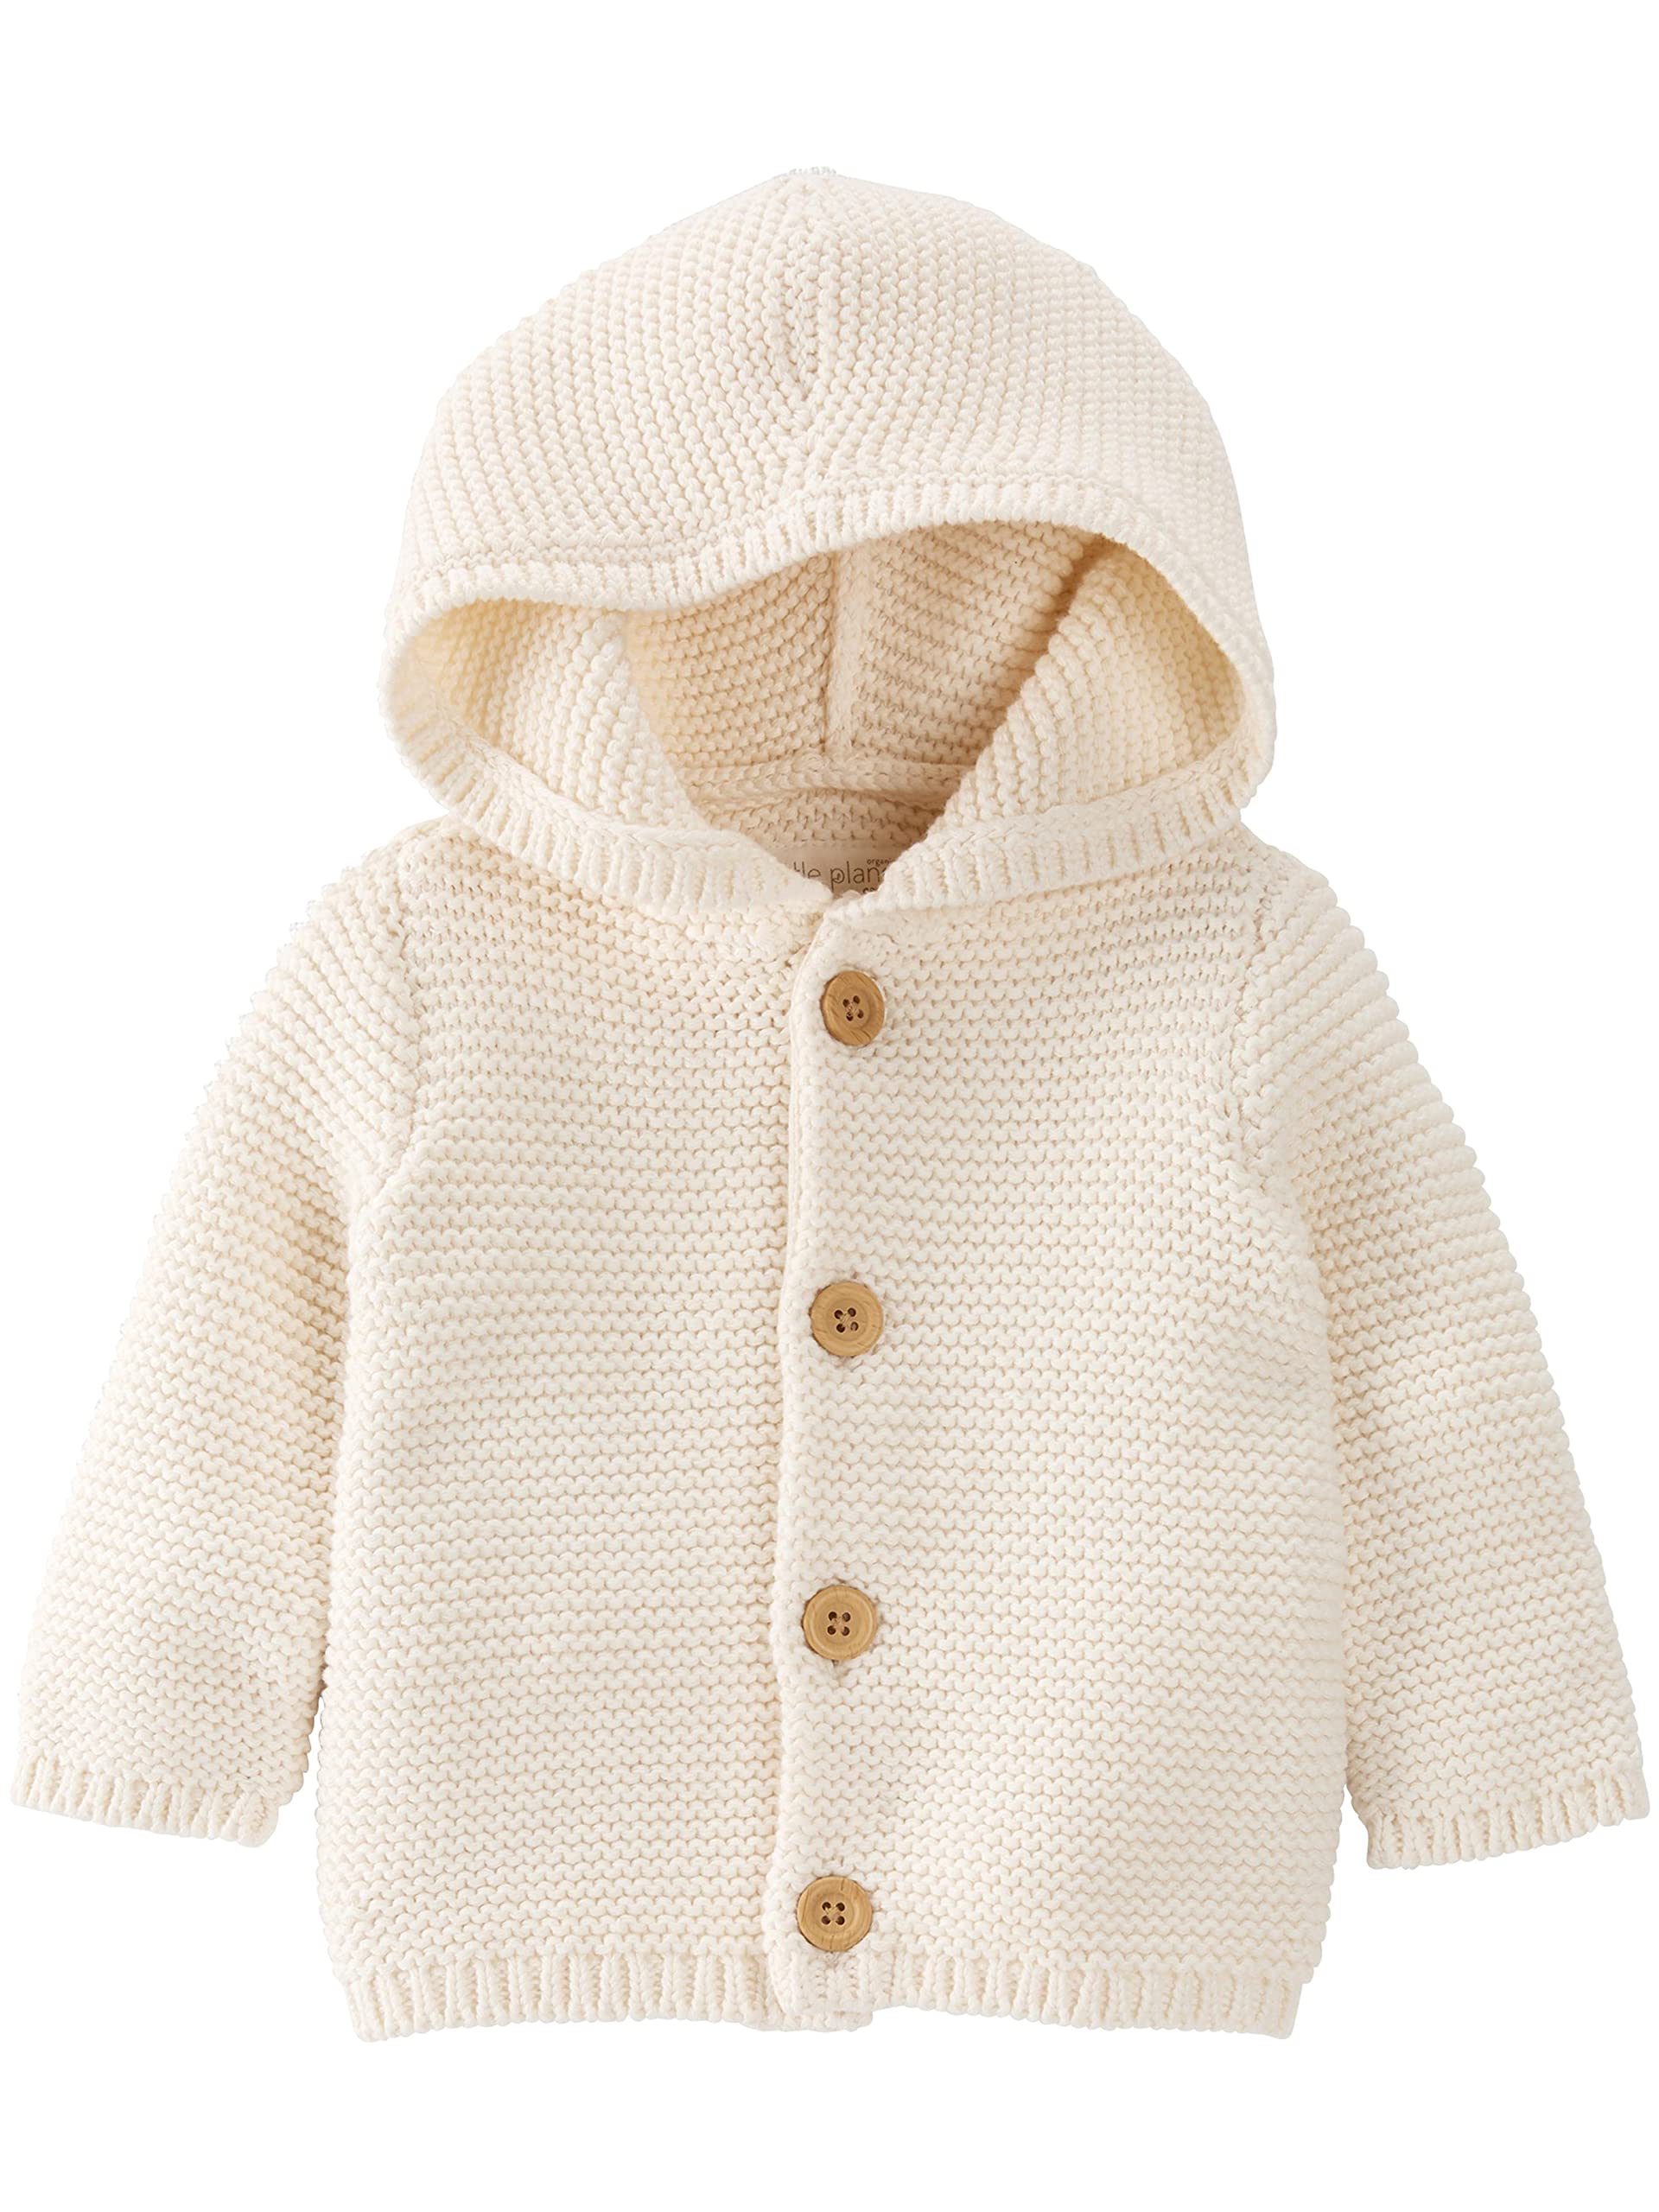 little planet by carter's Baby Organic Signature Stitch Cardigan